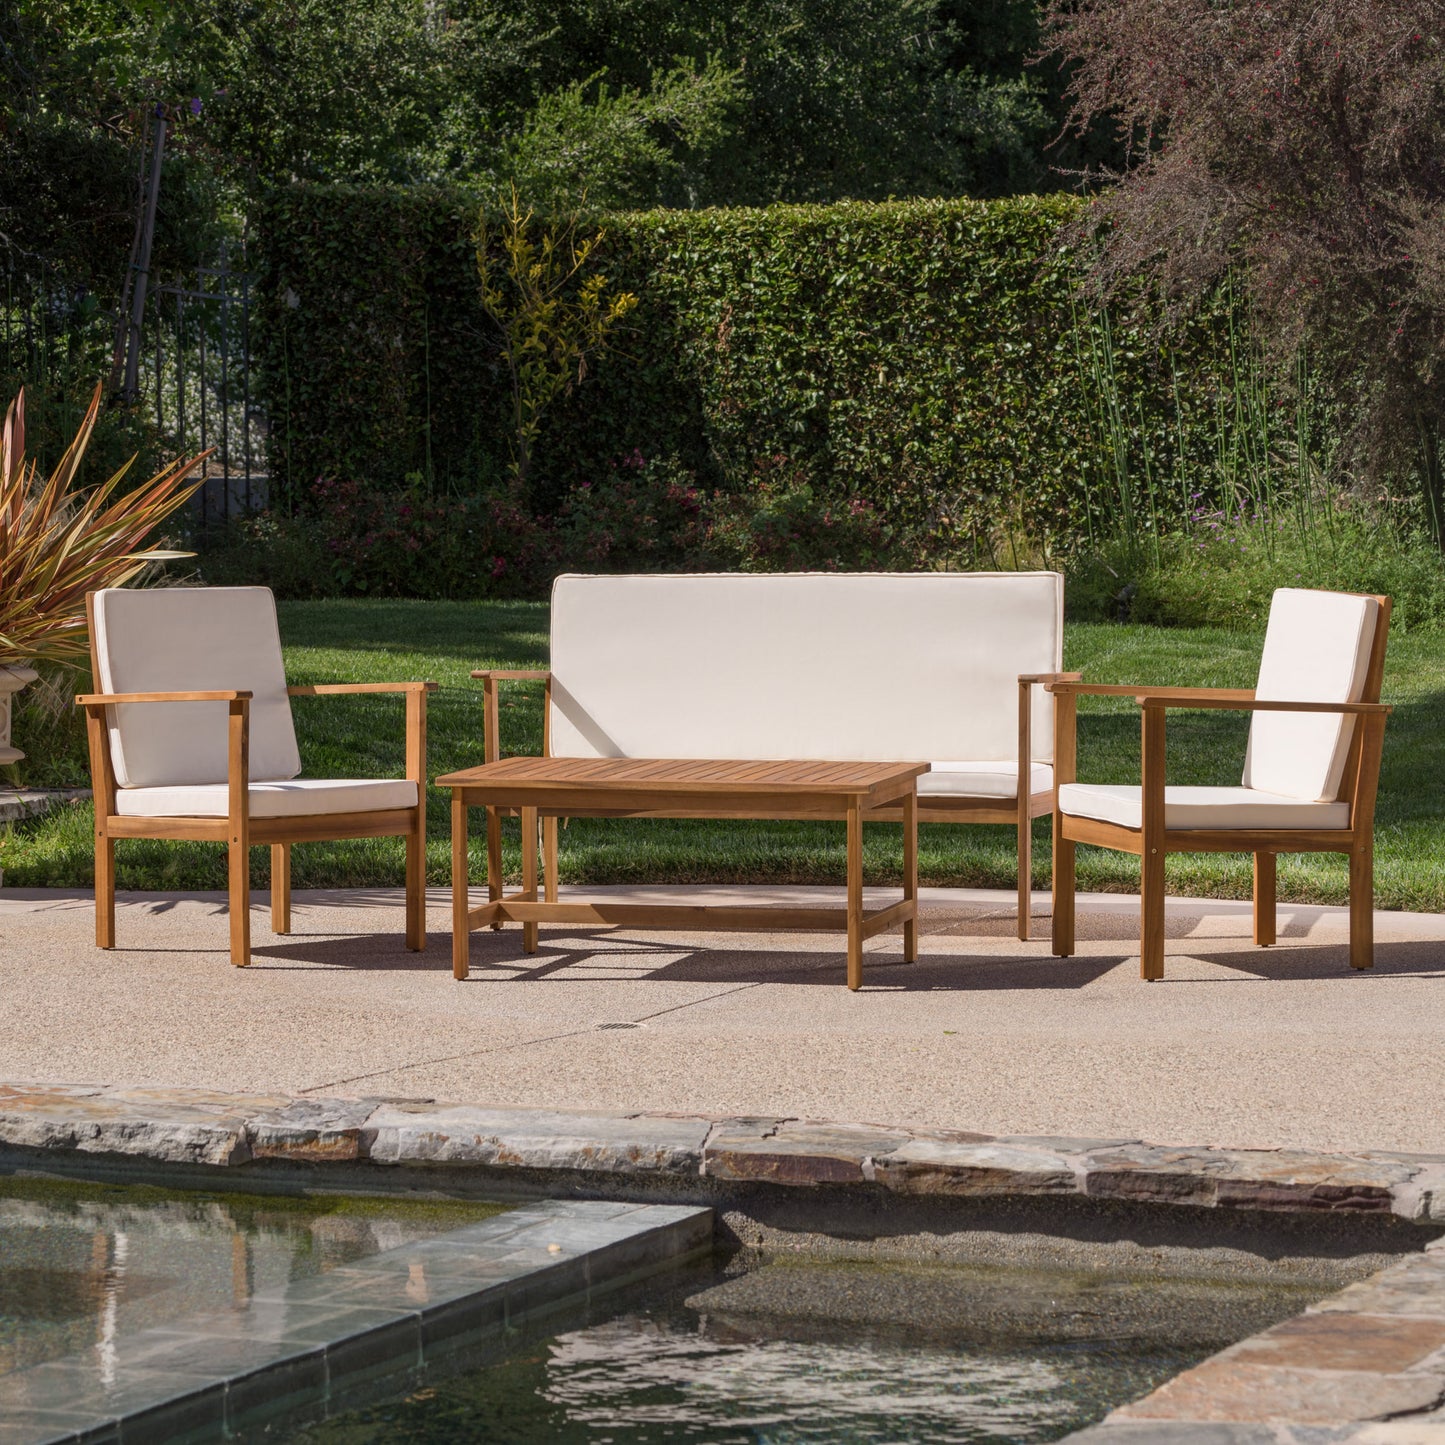 Luciano Outdoor Acacia Wood Chat Set w/ Water Resistant Cushions